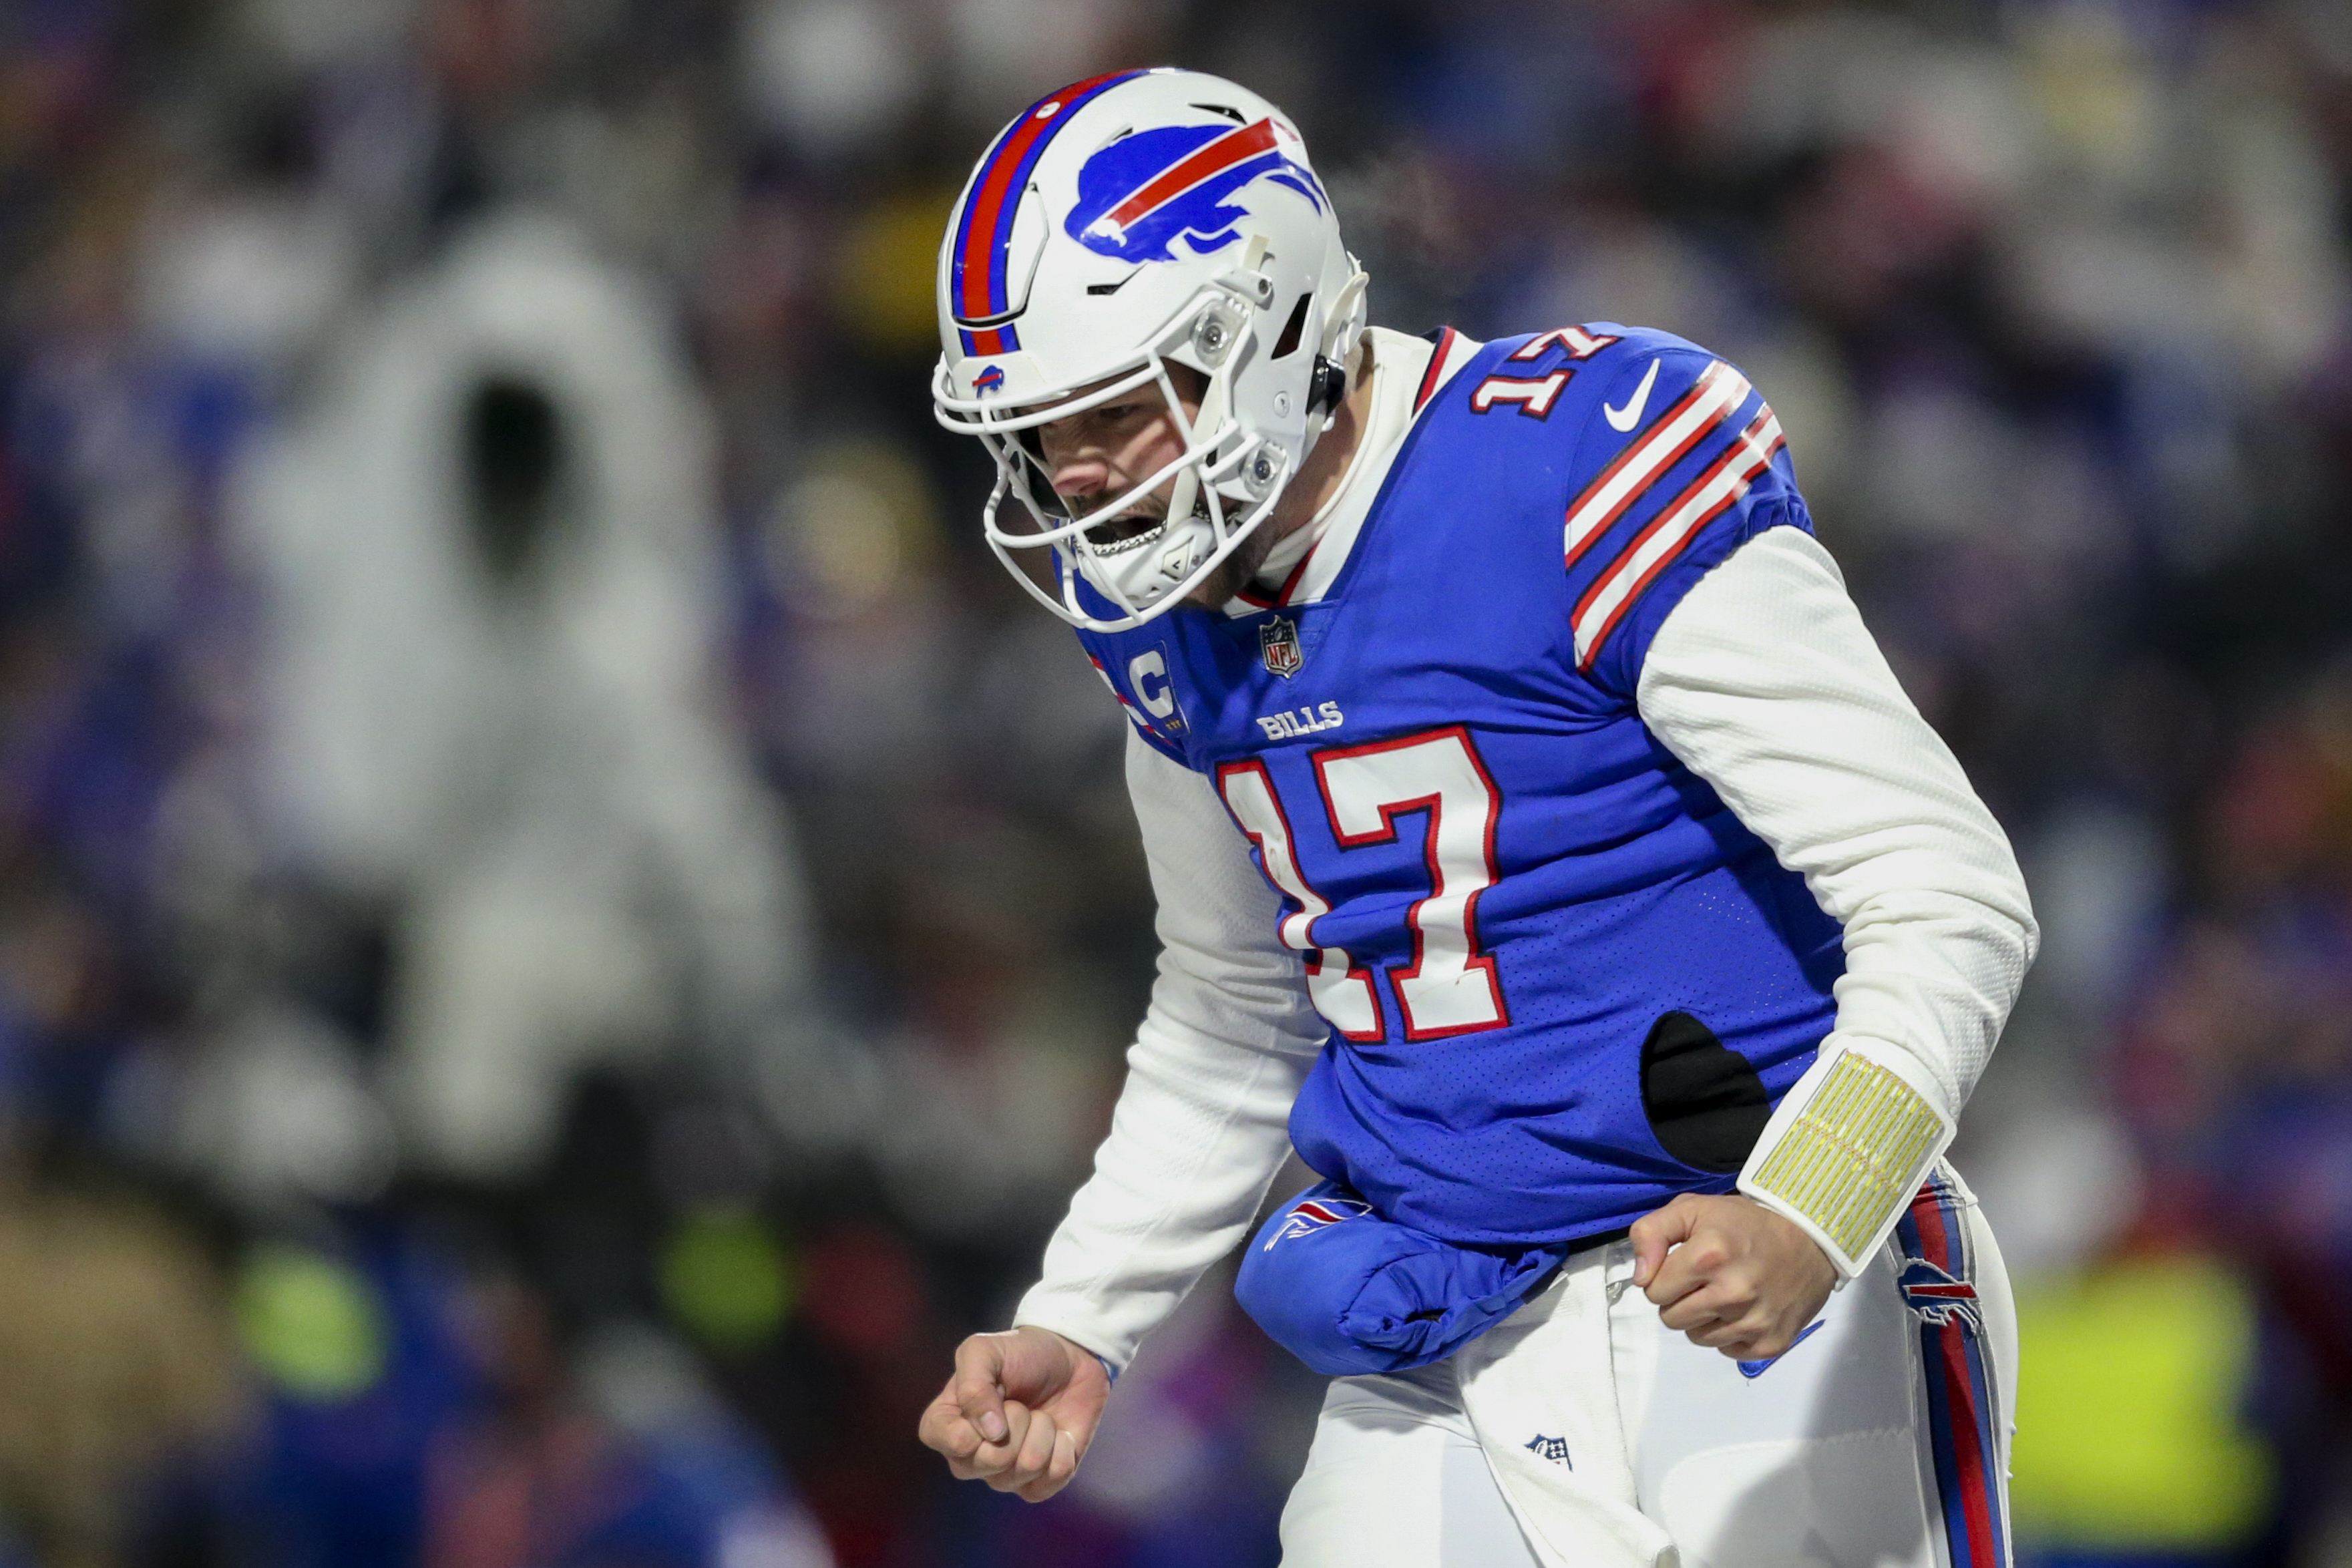 About those commercials? Inside the business of being Josh Allen